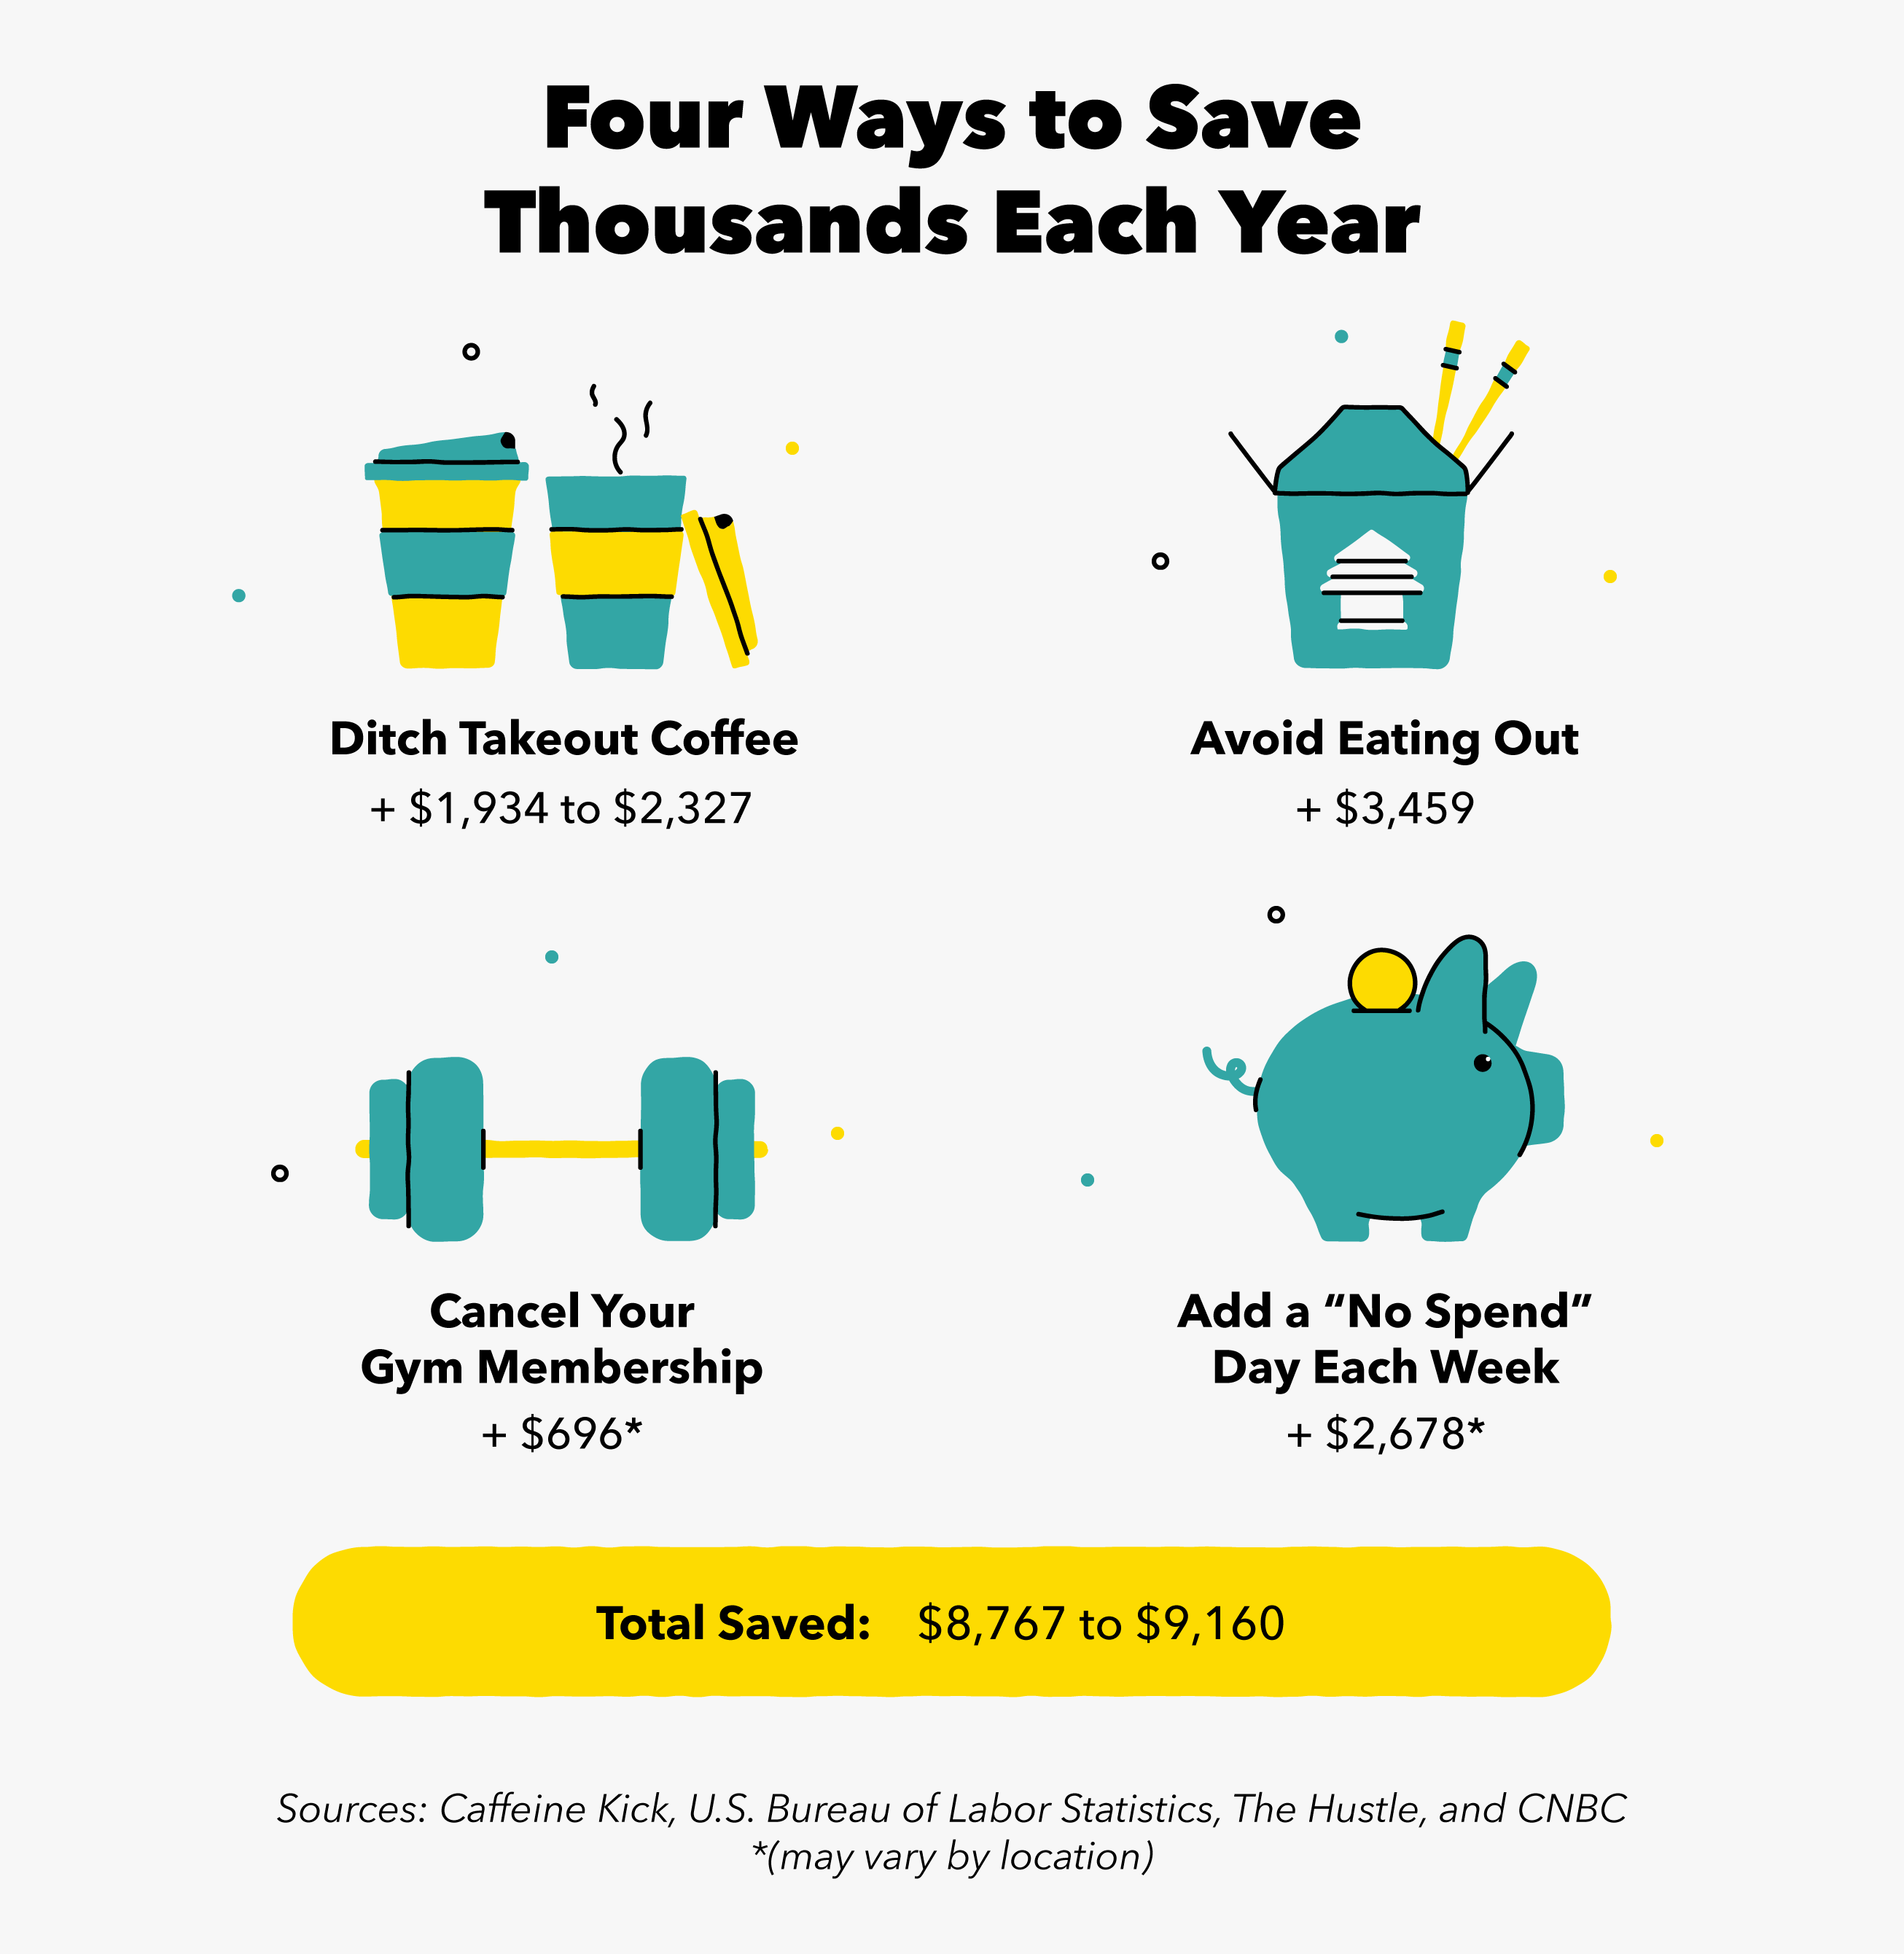 Four ways you can save thousands each year